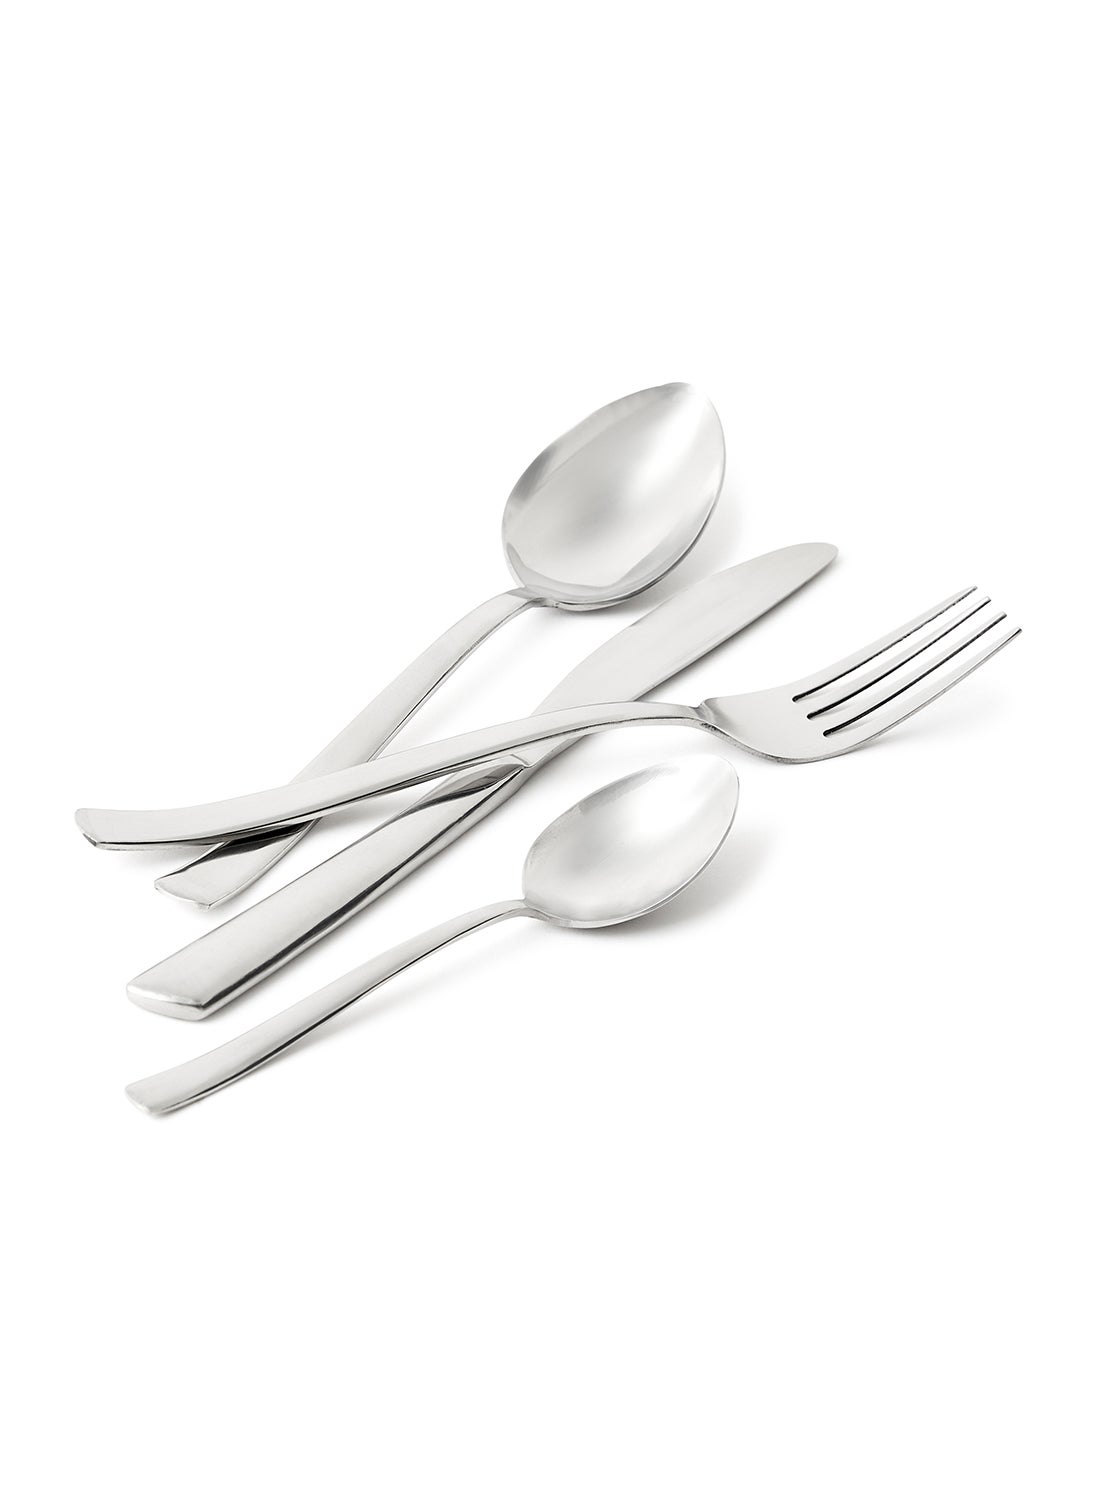 24 Piece Cutlery Set - Made Of Stainless Steel - Silverware Flatware - Spoons And Forks Set, Spoon Set - Table Spoons, Tea Spoons, Forks, Knives - Serves 6 - Design Silver Spade 